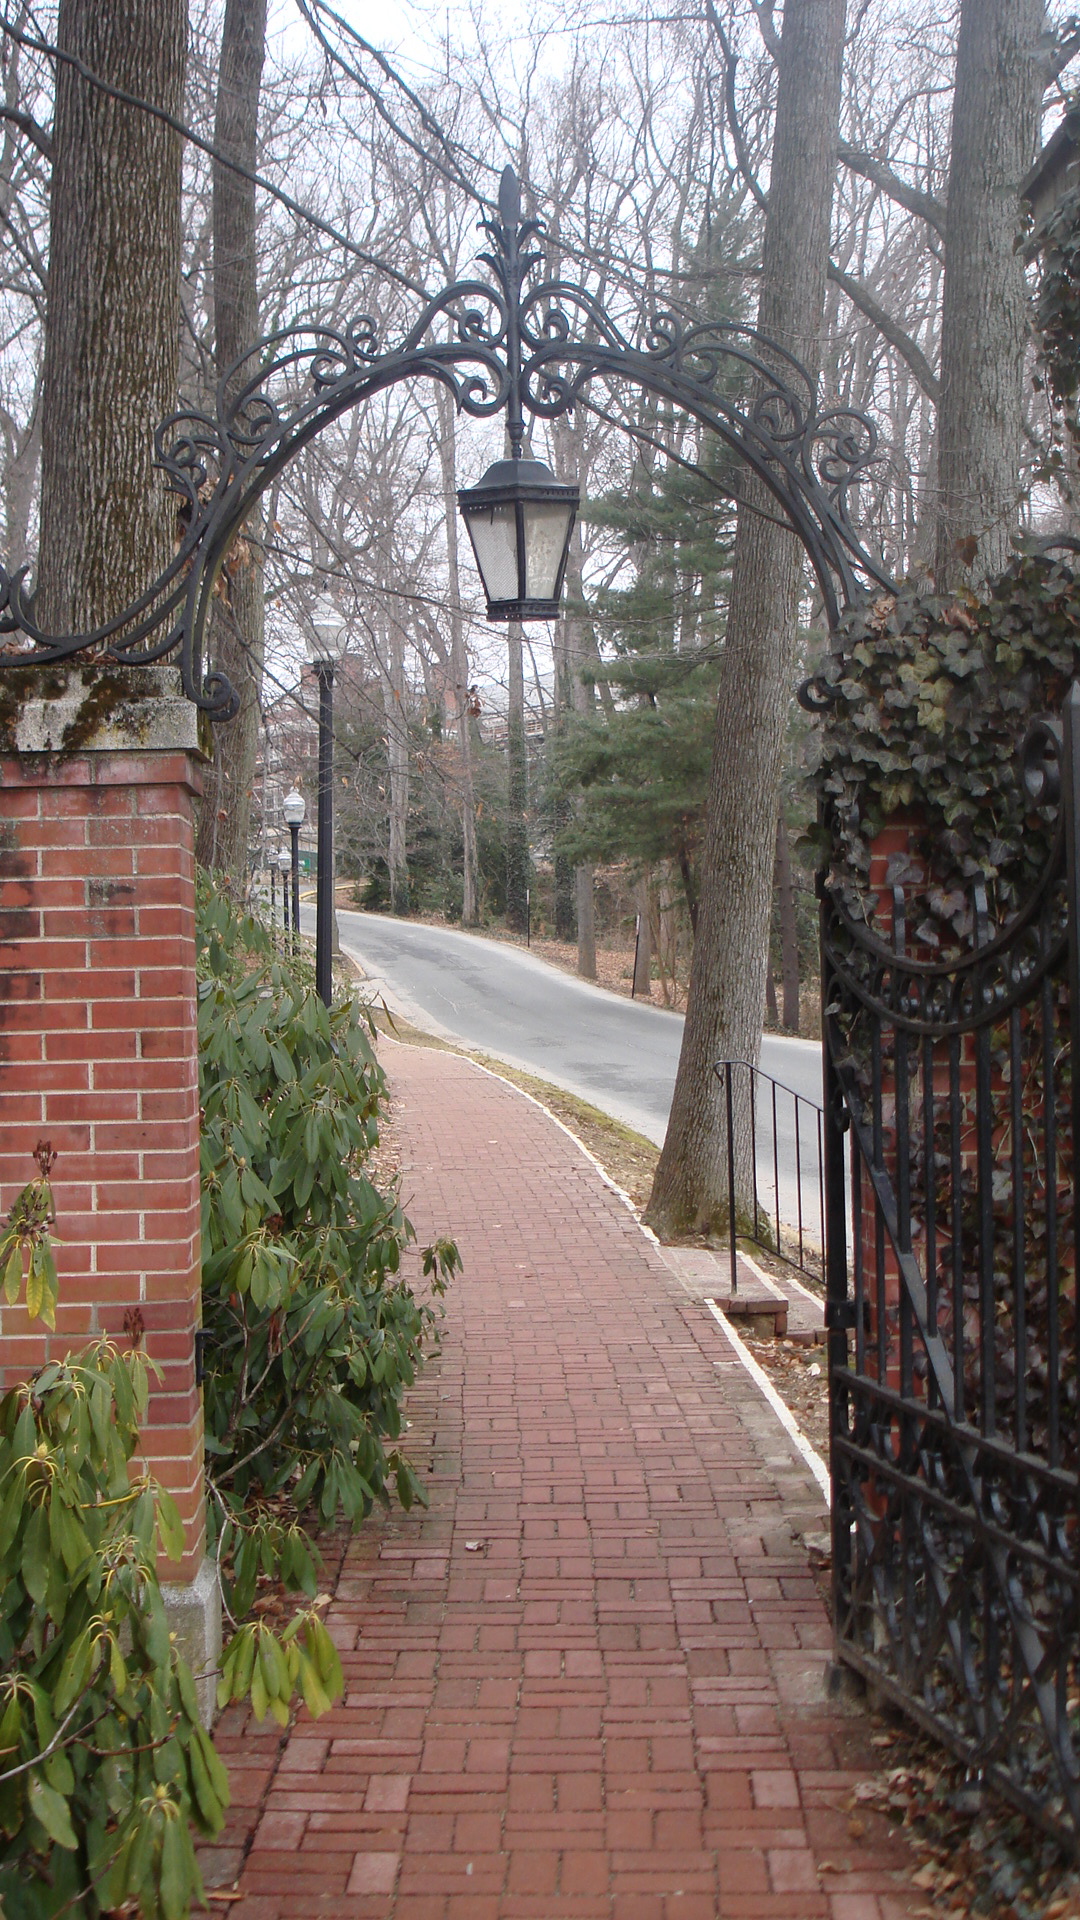 an arched iron gate leads into a path leading to a red brick path in the woods